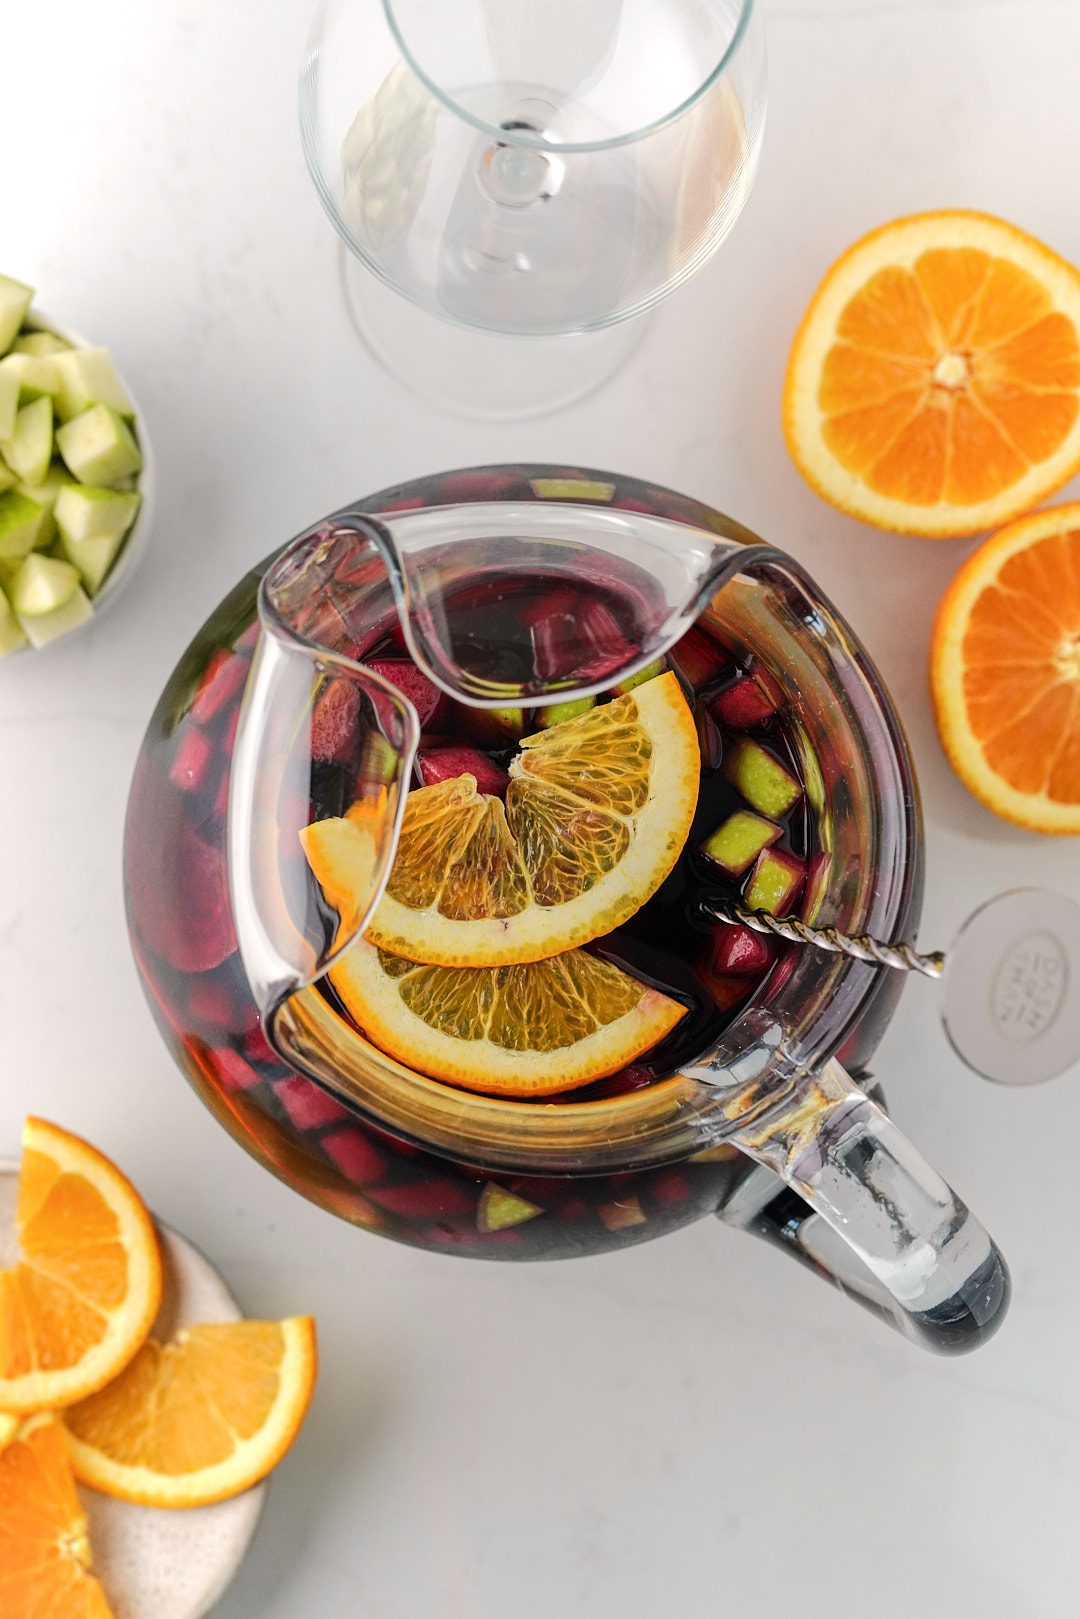 Overhead view of sangria in a glass pitcher with orange slices and long spoon.